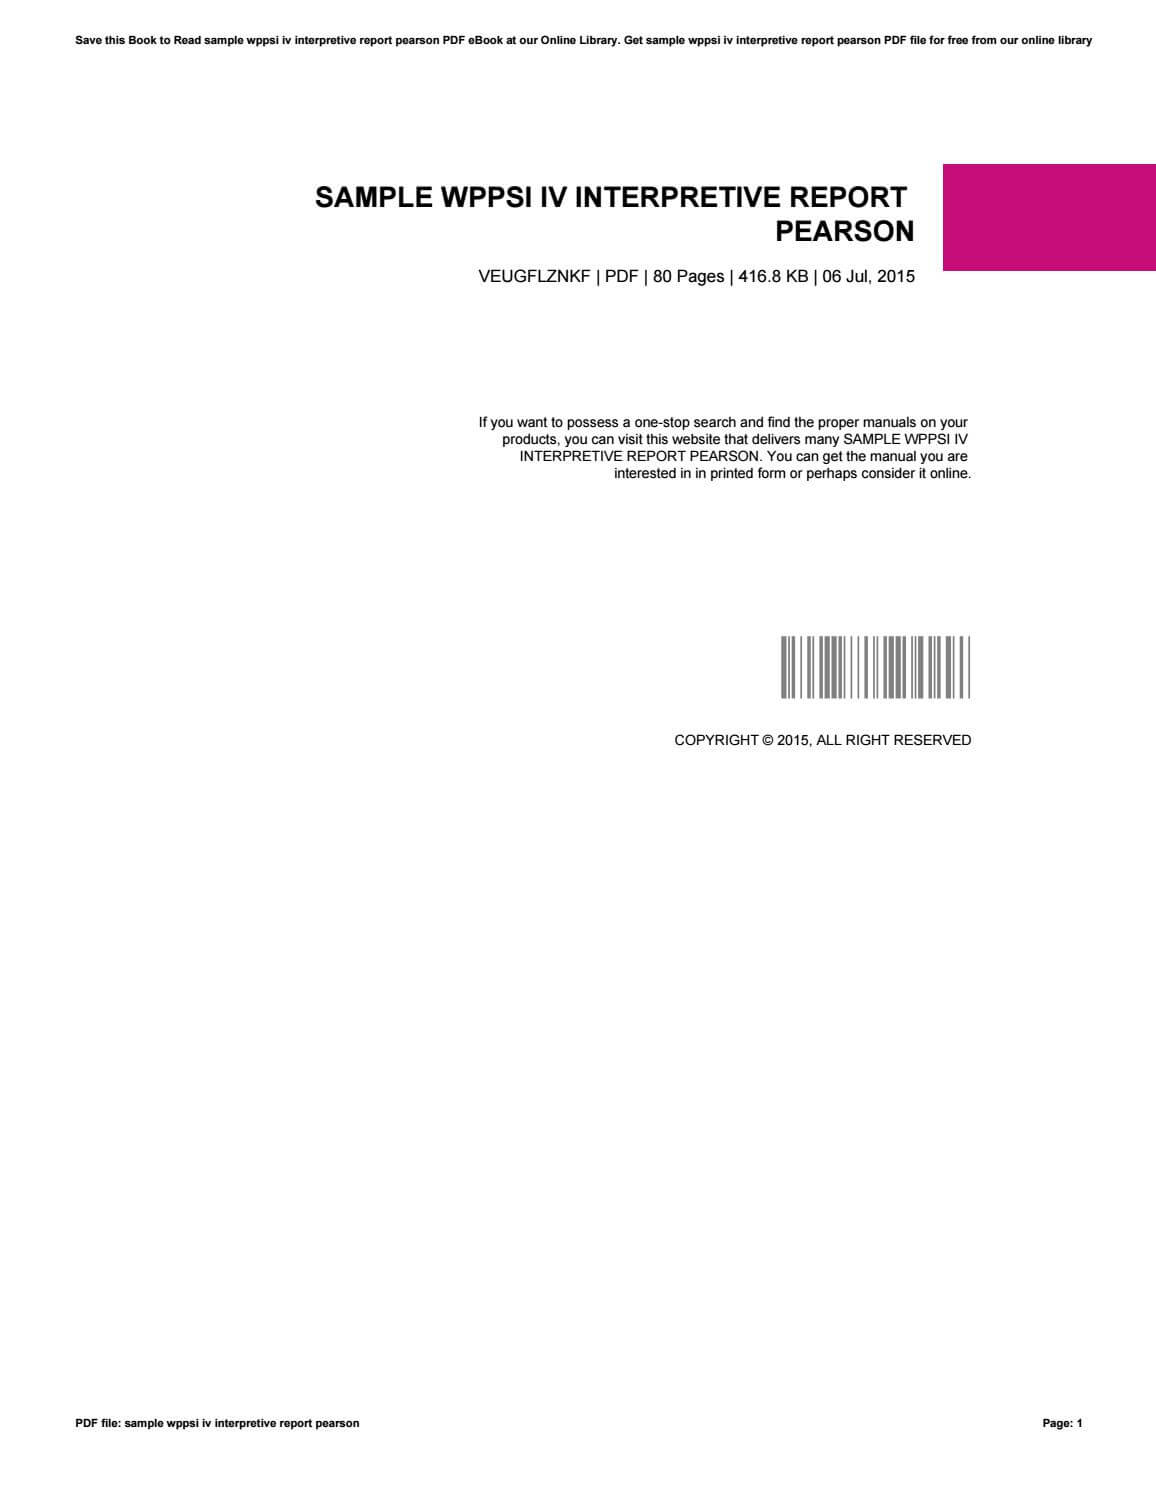 Sample Wppsi Iv Interpretive Report Pearson Intended For Wppsi Iv Report Template